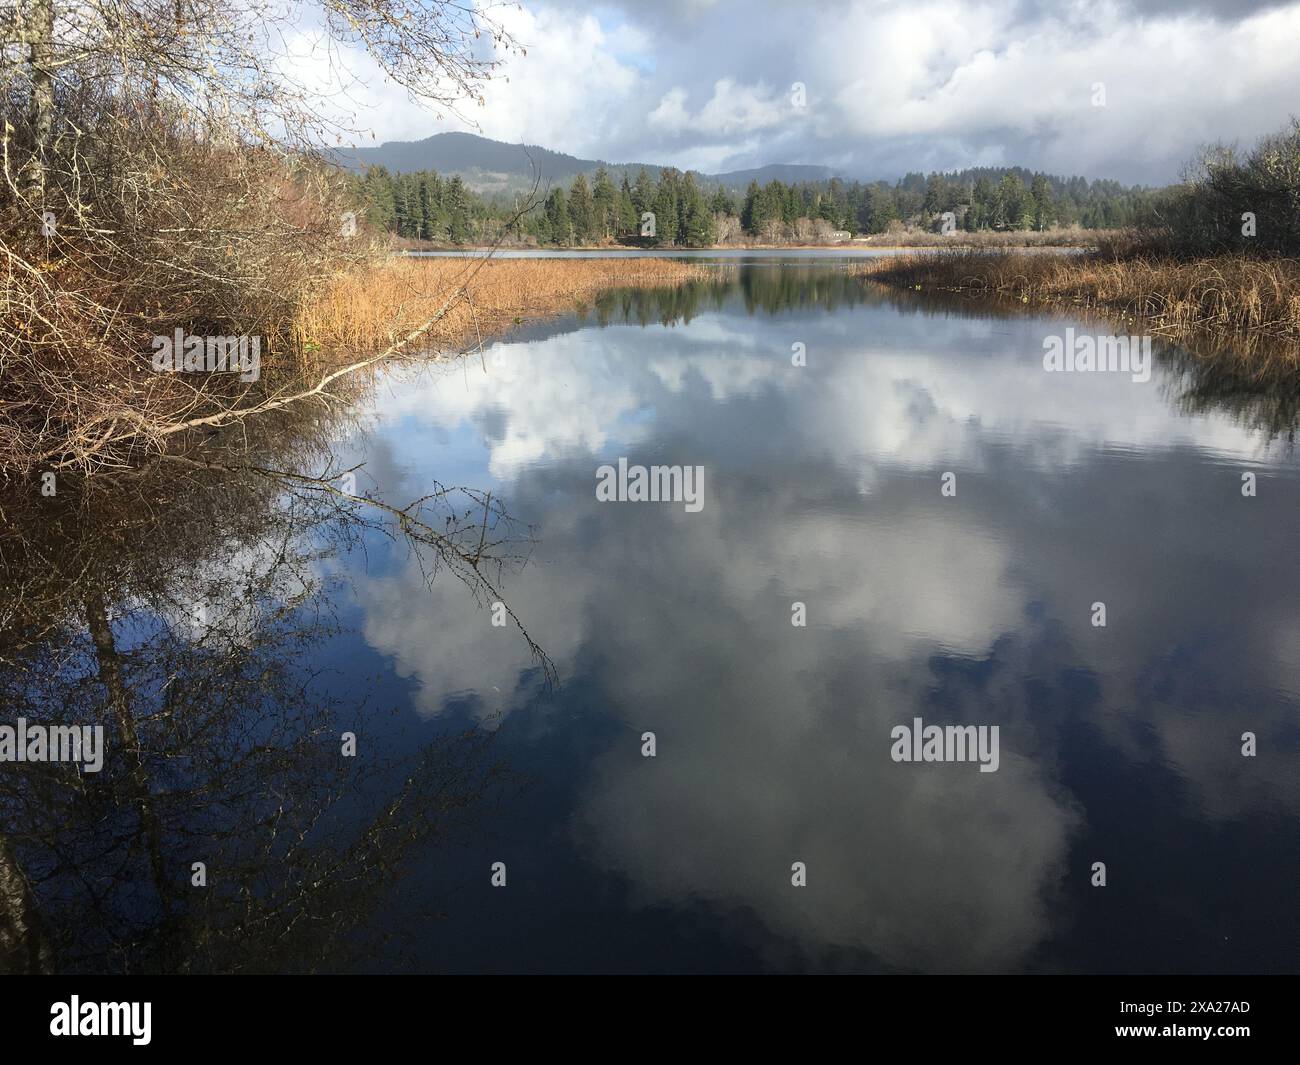 A scenic view of Sutton Lake on a sunny day with cloud reflections in calm waters, Florence, Oregon Stock Photo